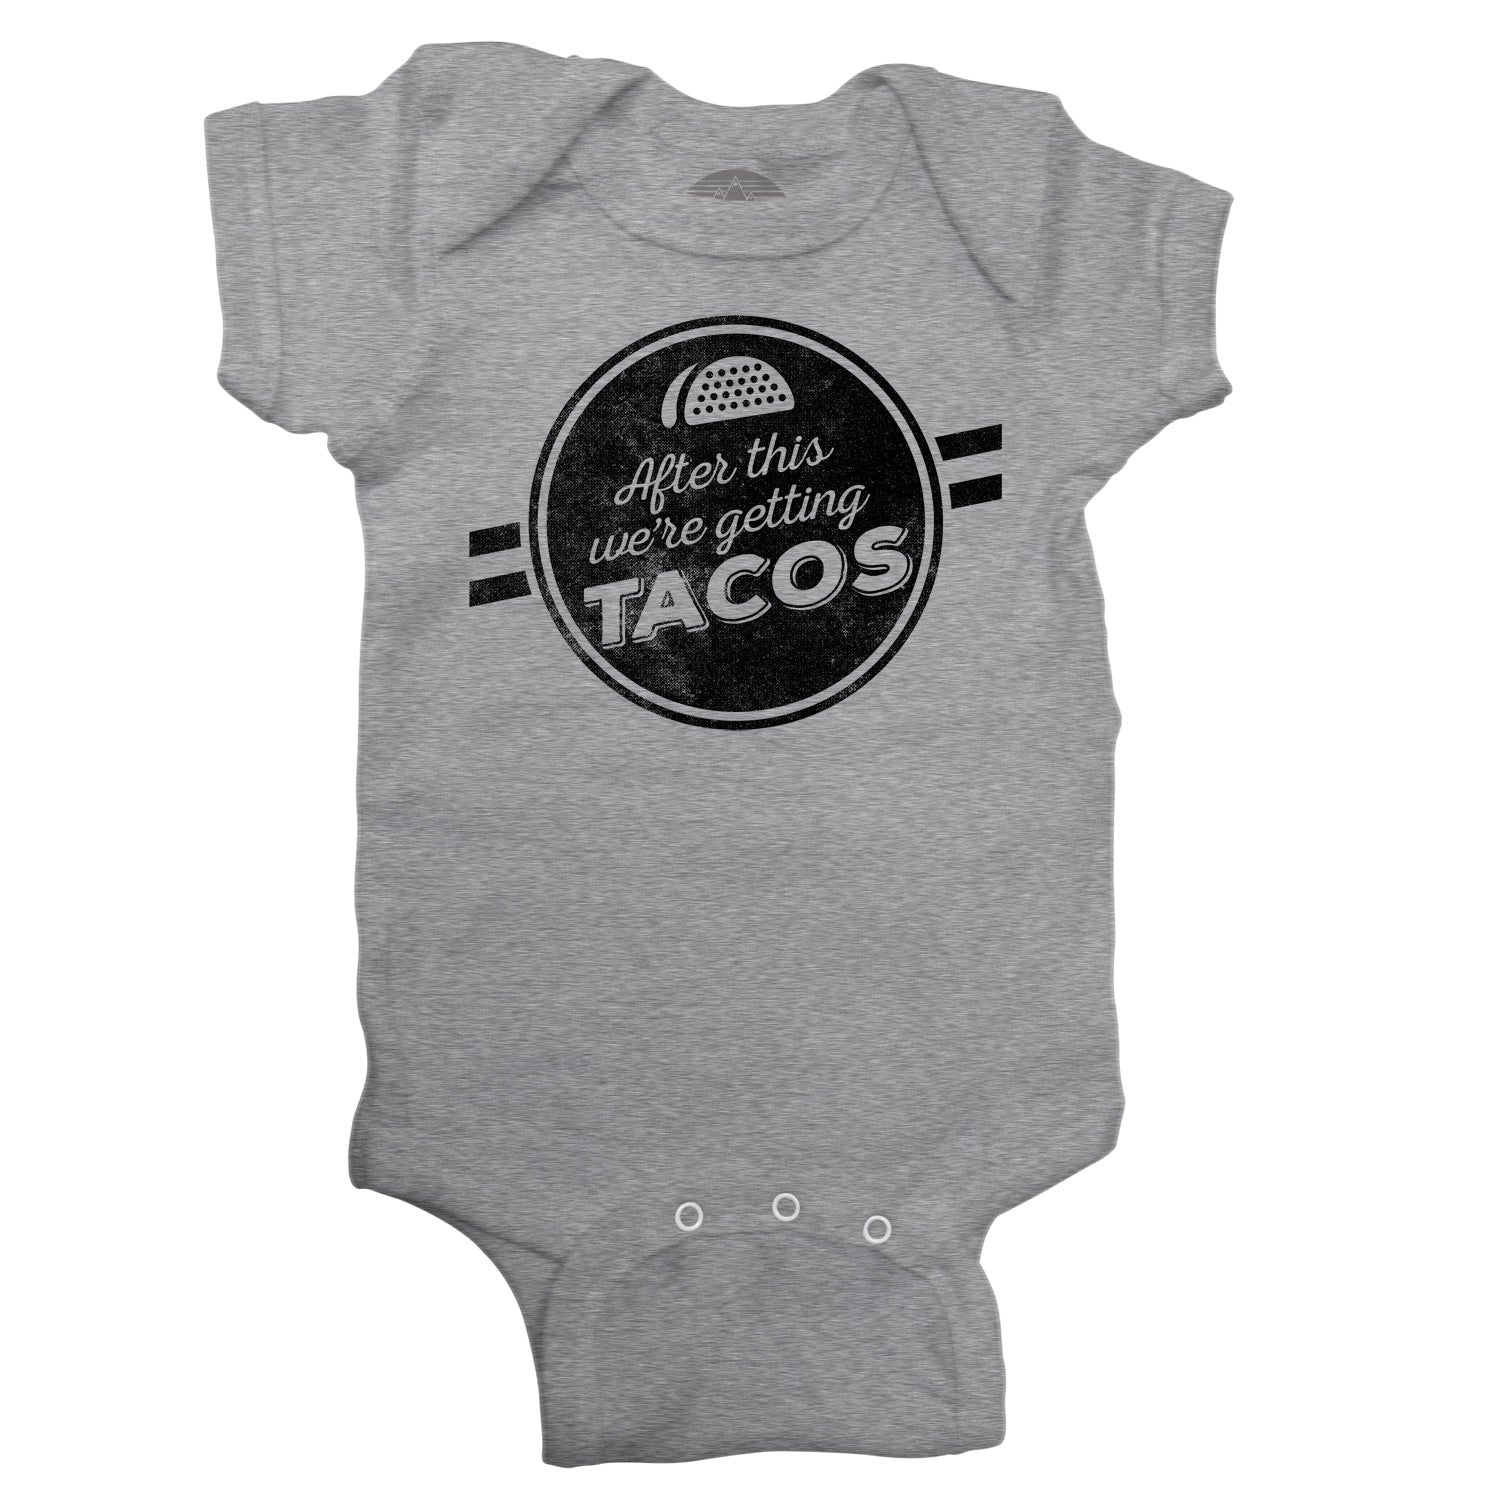 After This We're Getting Tacos Infant Bodysuit - Unisex Fit